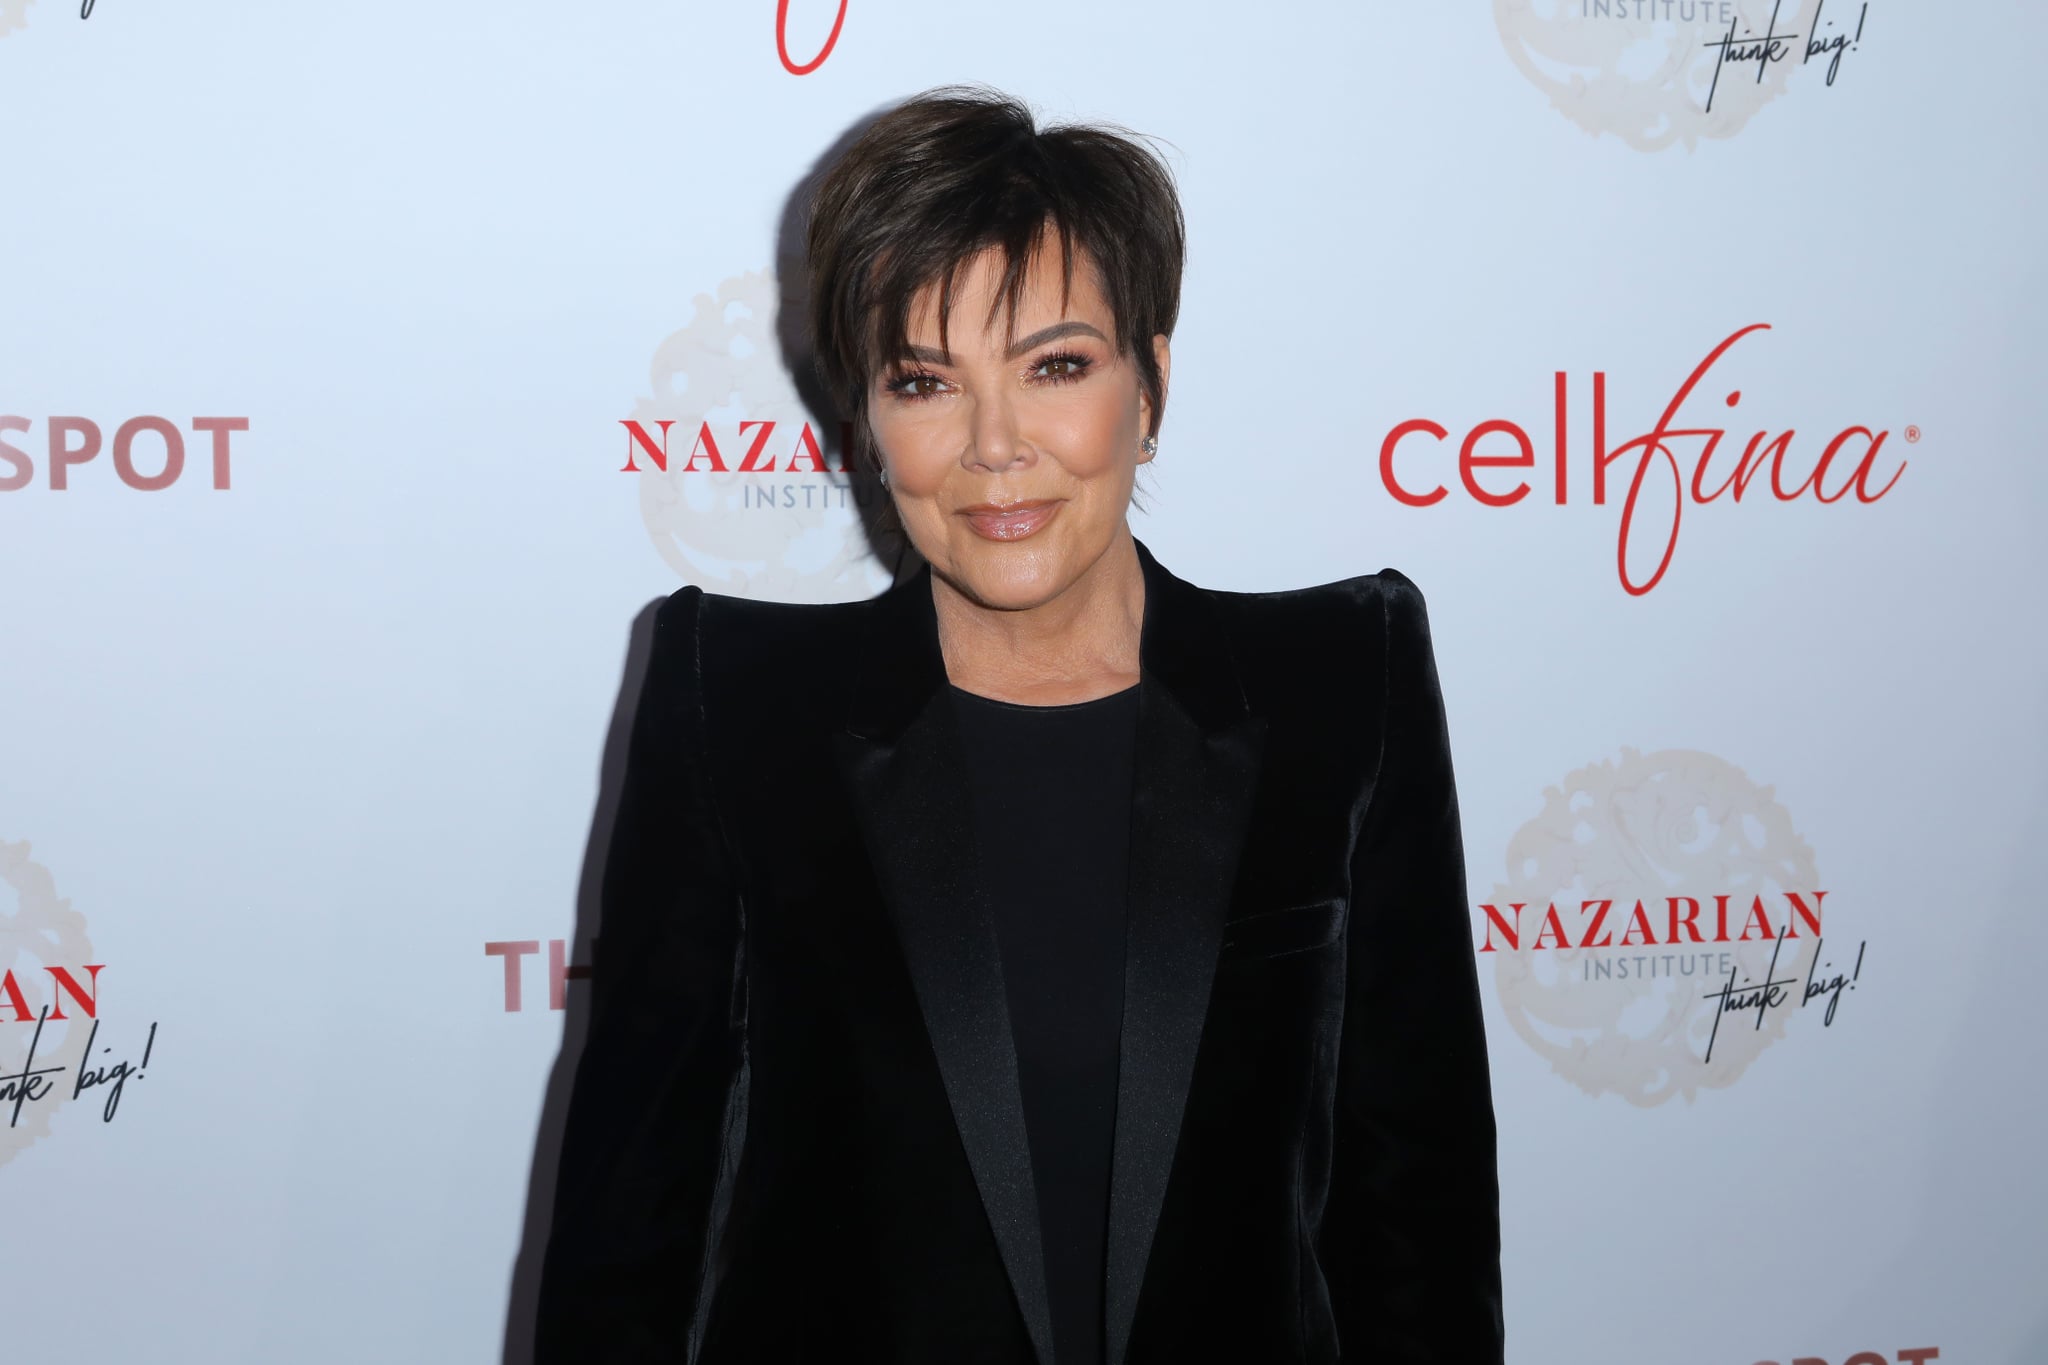 WEST HOLLYWOOD, CALIFORNIA - JANUARY 11: Kris Jenner attends the Nazarian Institute's ThinkBIG 2020 Conference featuring keynote speaker Kris Jenner at 1 Hotel West Hollywood on January 11, 2020 in West Hollywood, California. (Photo by JC Olivera/Getty Images)